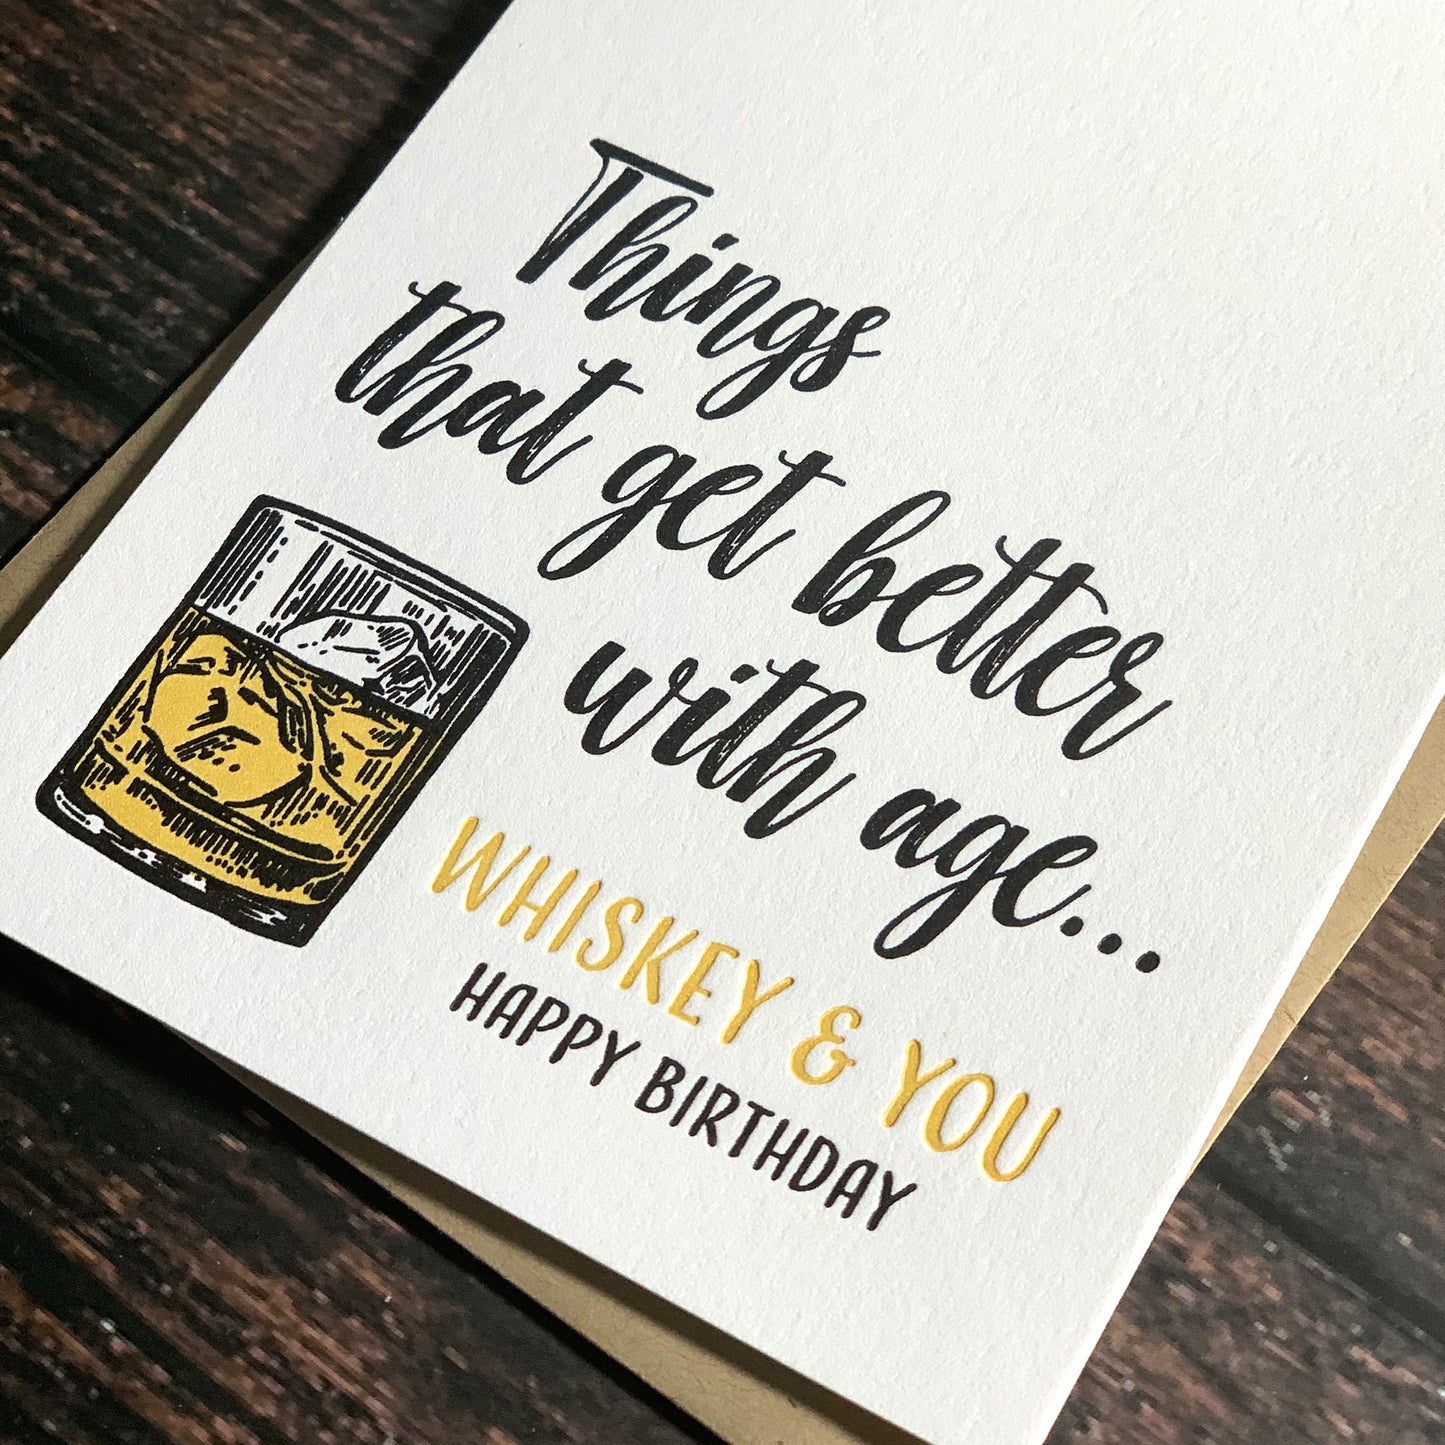 Things that get better with age, whiskey and you, Happy Birthday card, whiskey on the rocks, Letterpress printed, view shows letterpress impression, includes envelope